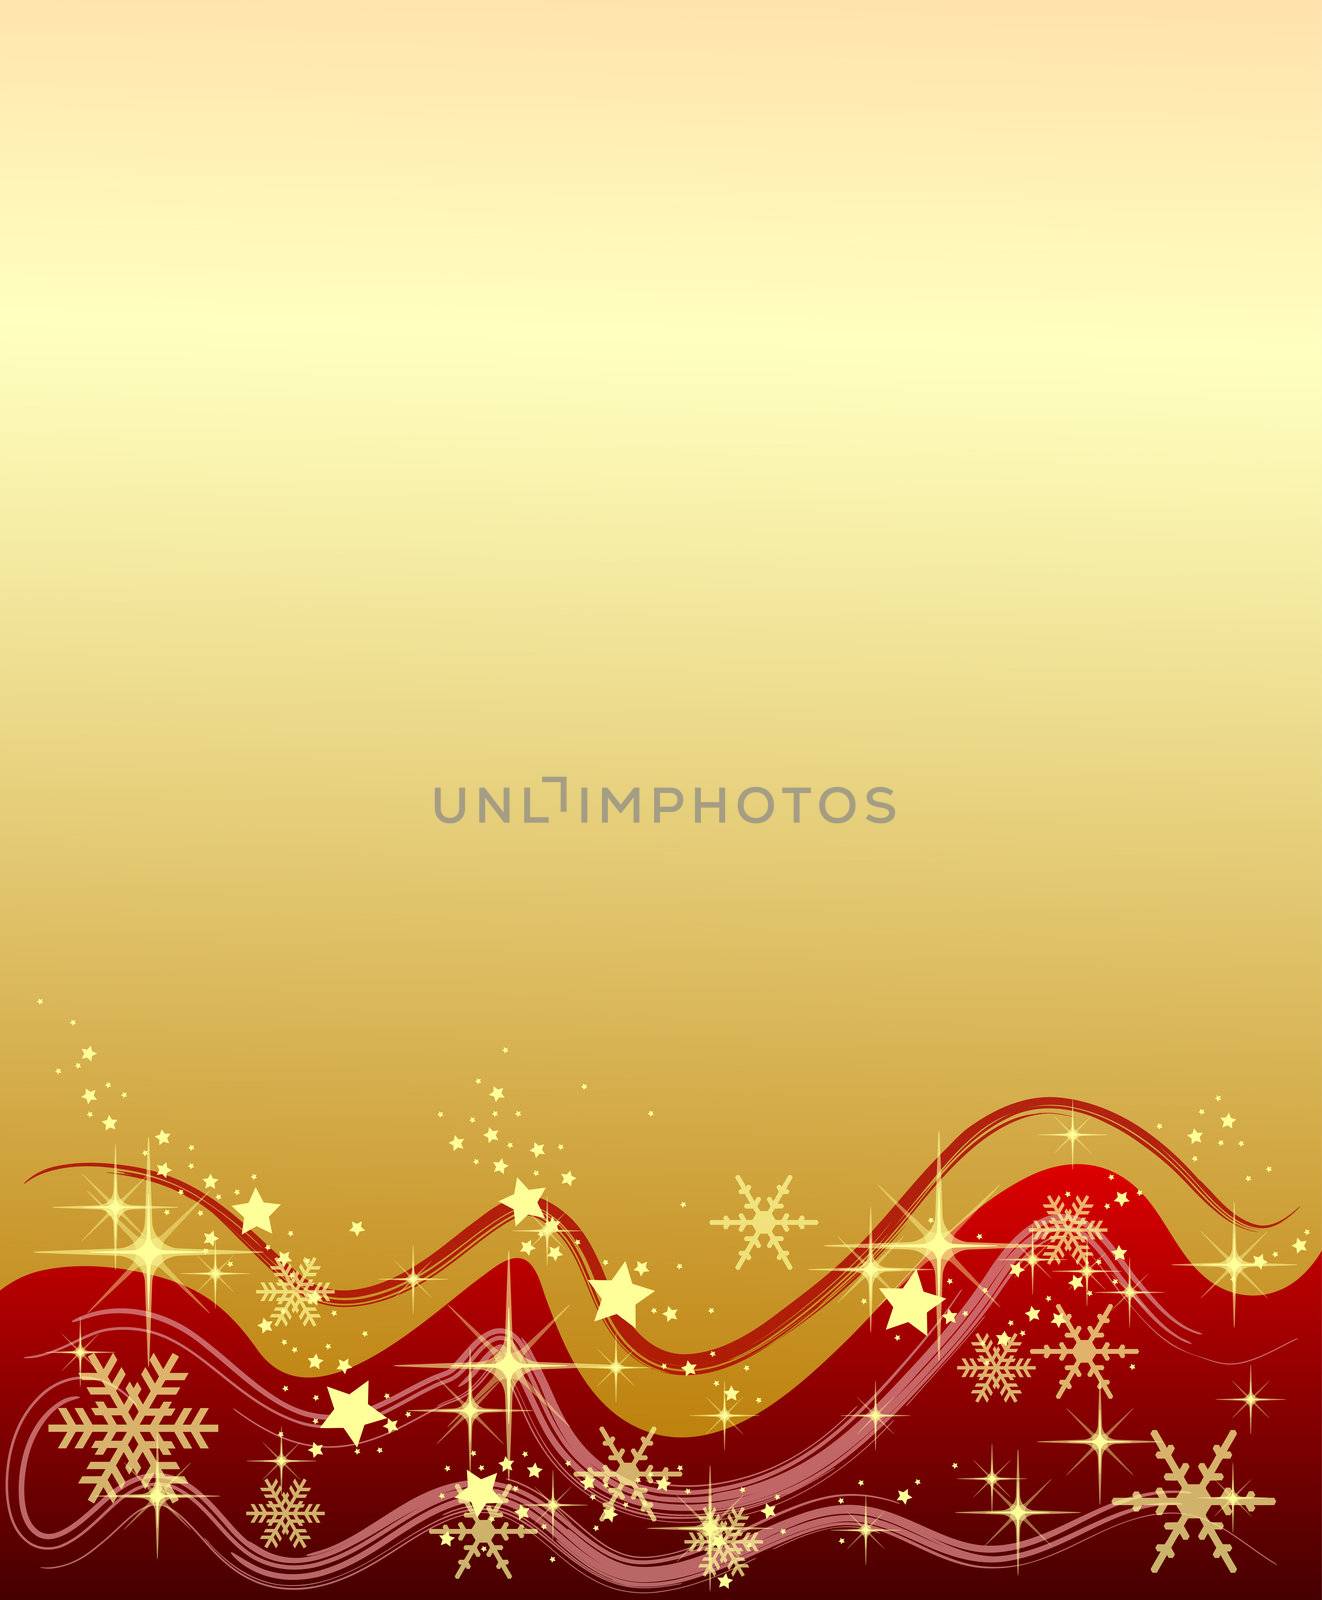 Illustration of a golden background with stars and snowflakes